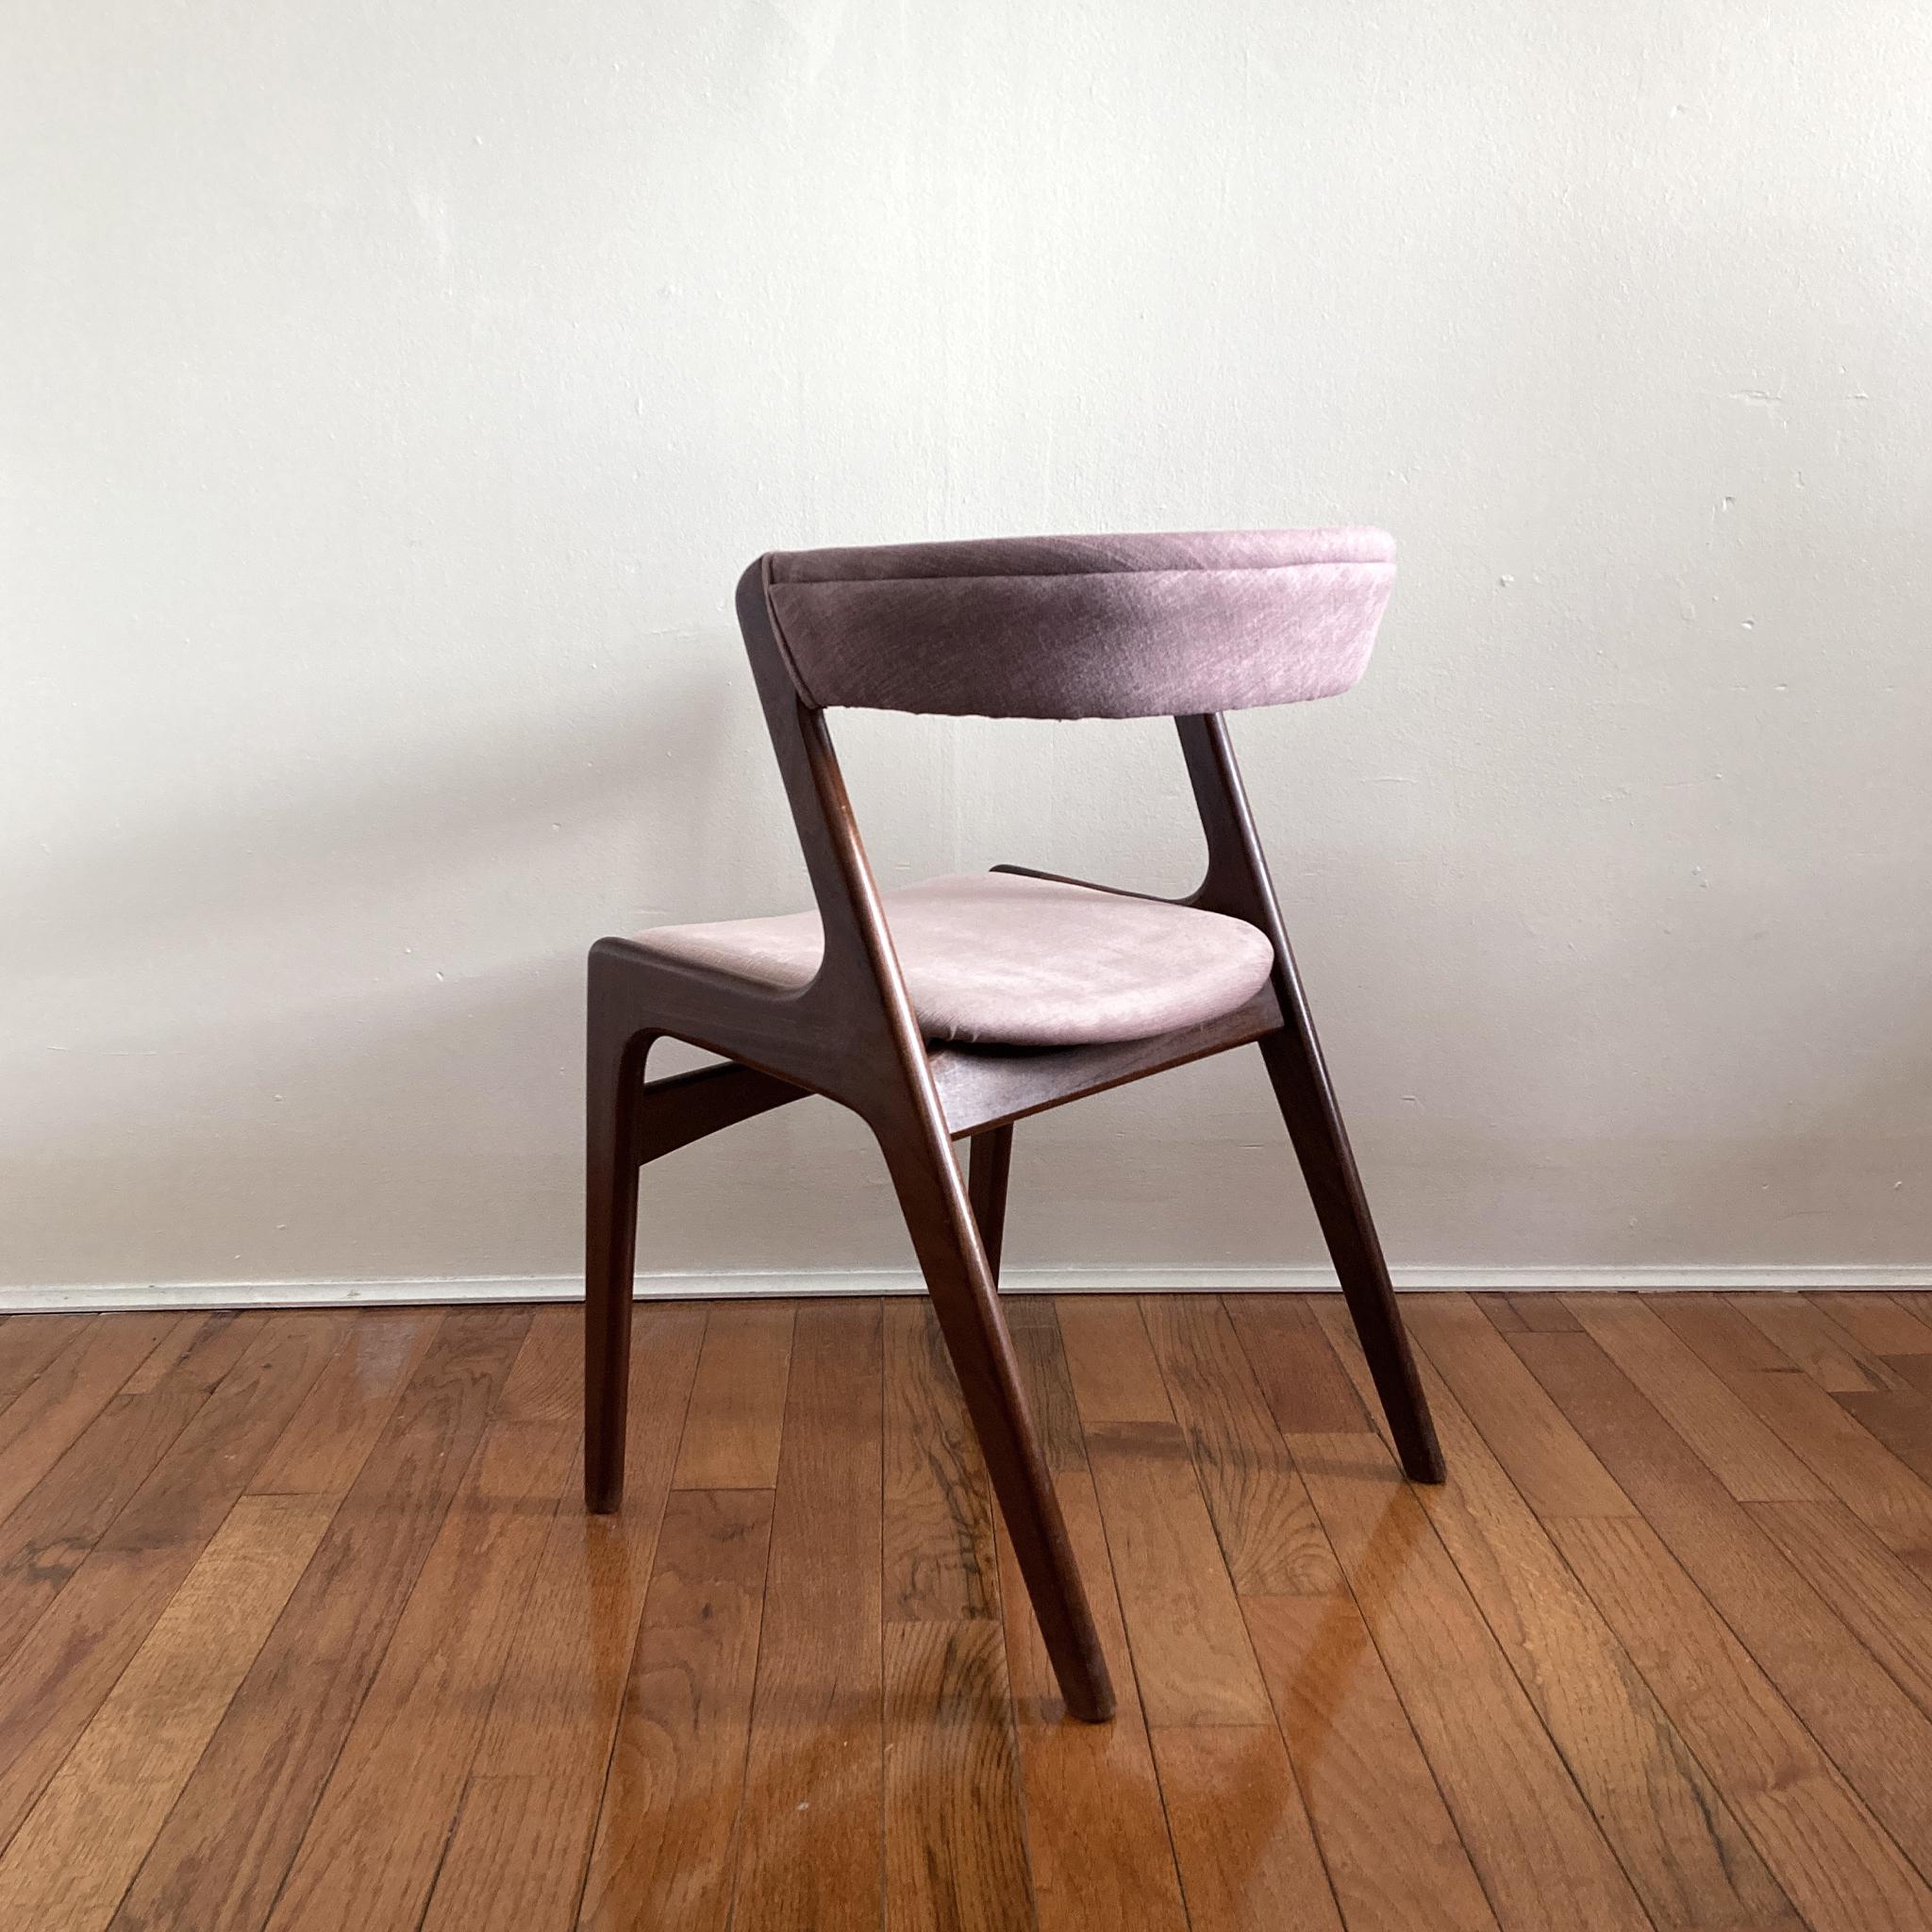 Fabric Kai Kristiansen Mauve Pink Curved Back Chair, 1960s For Sale